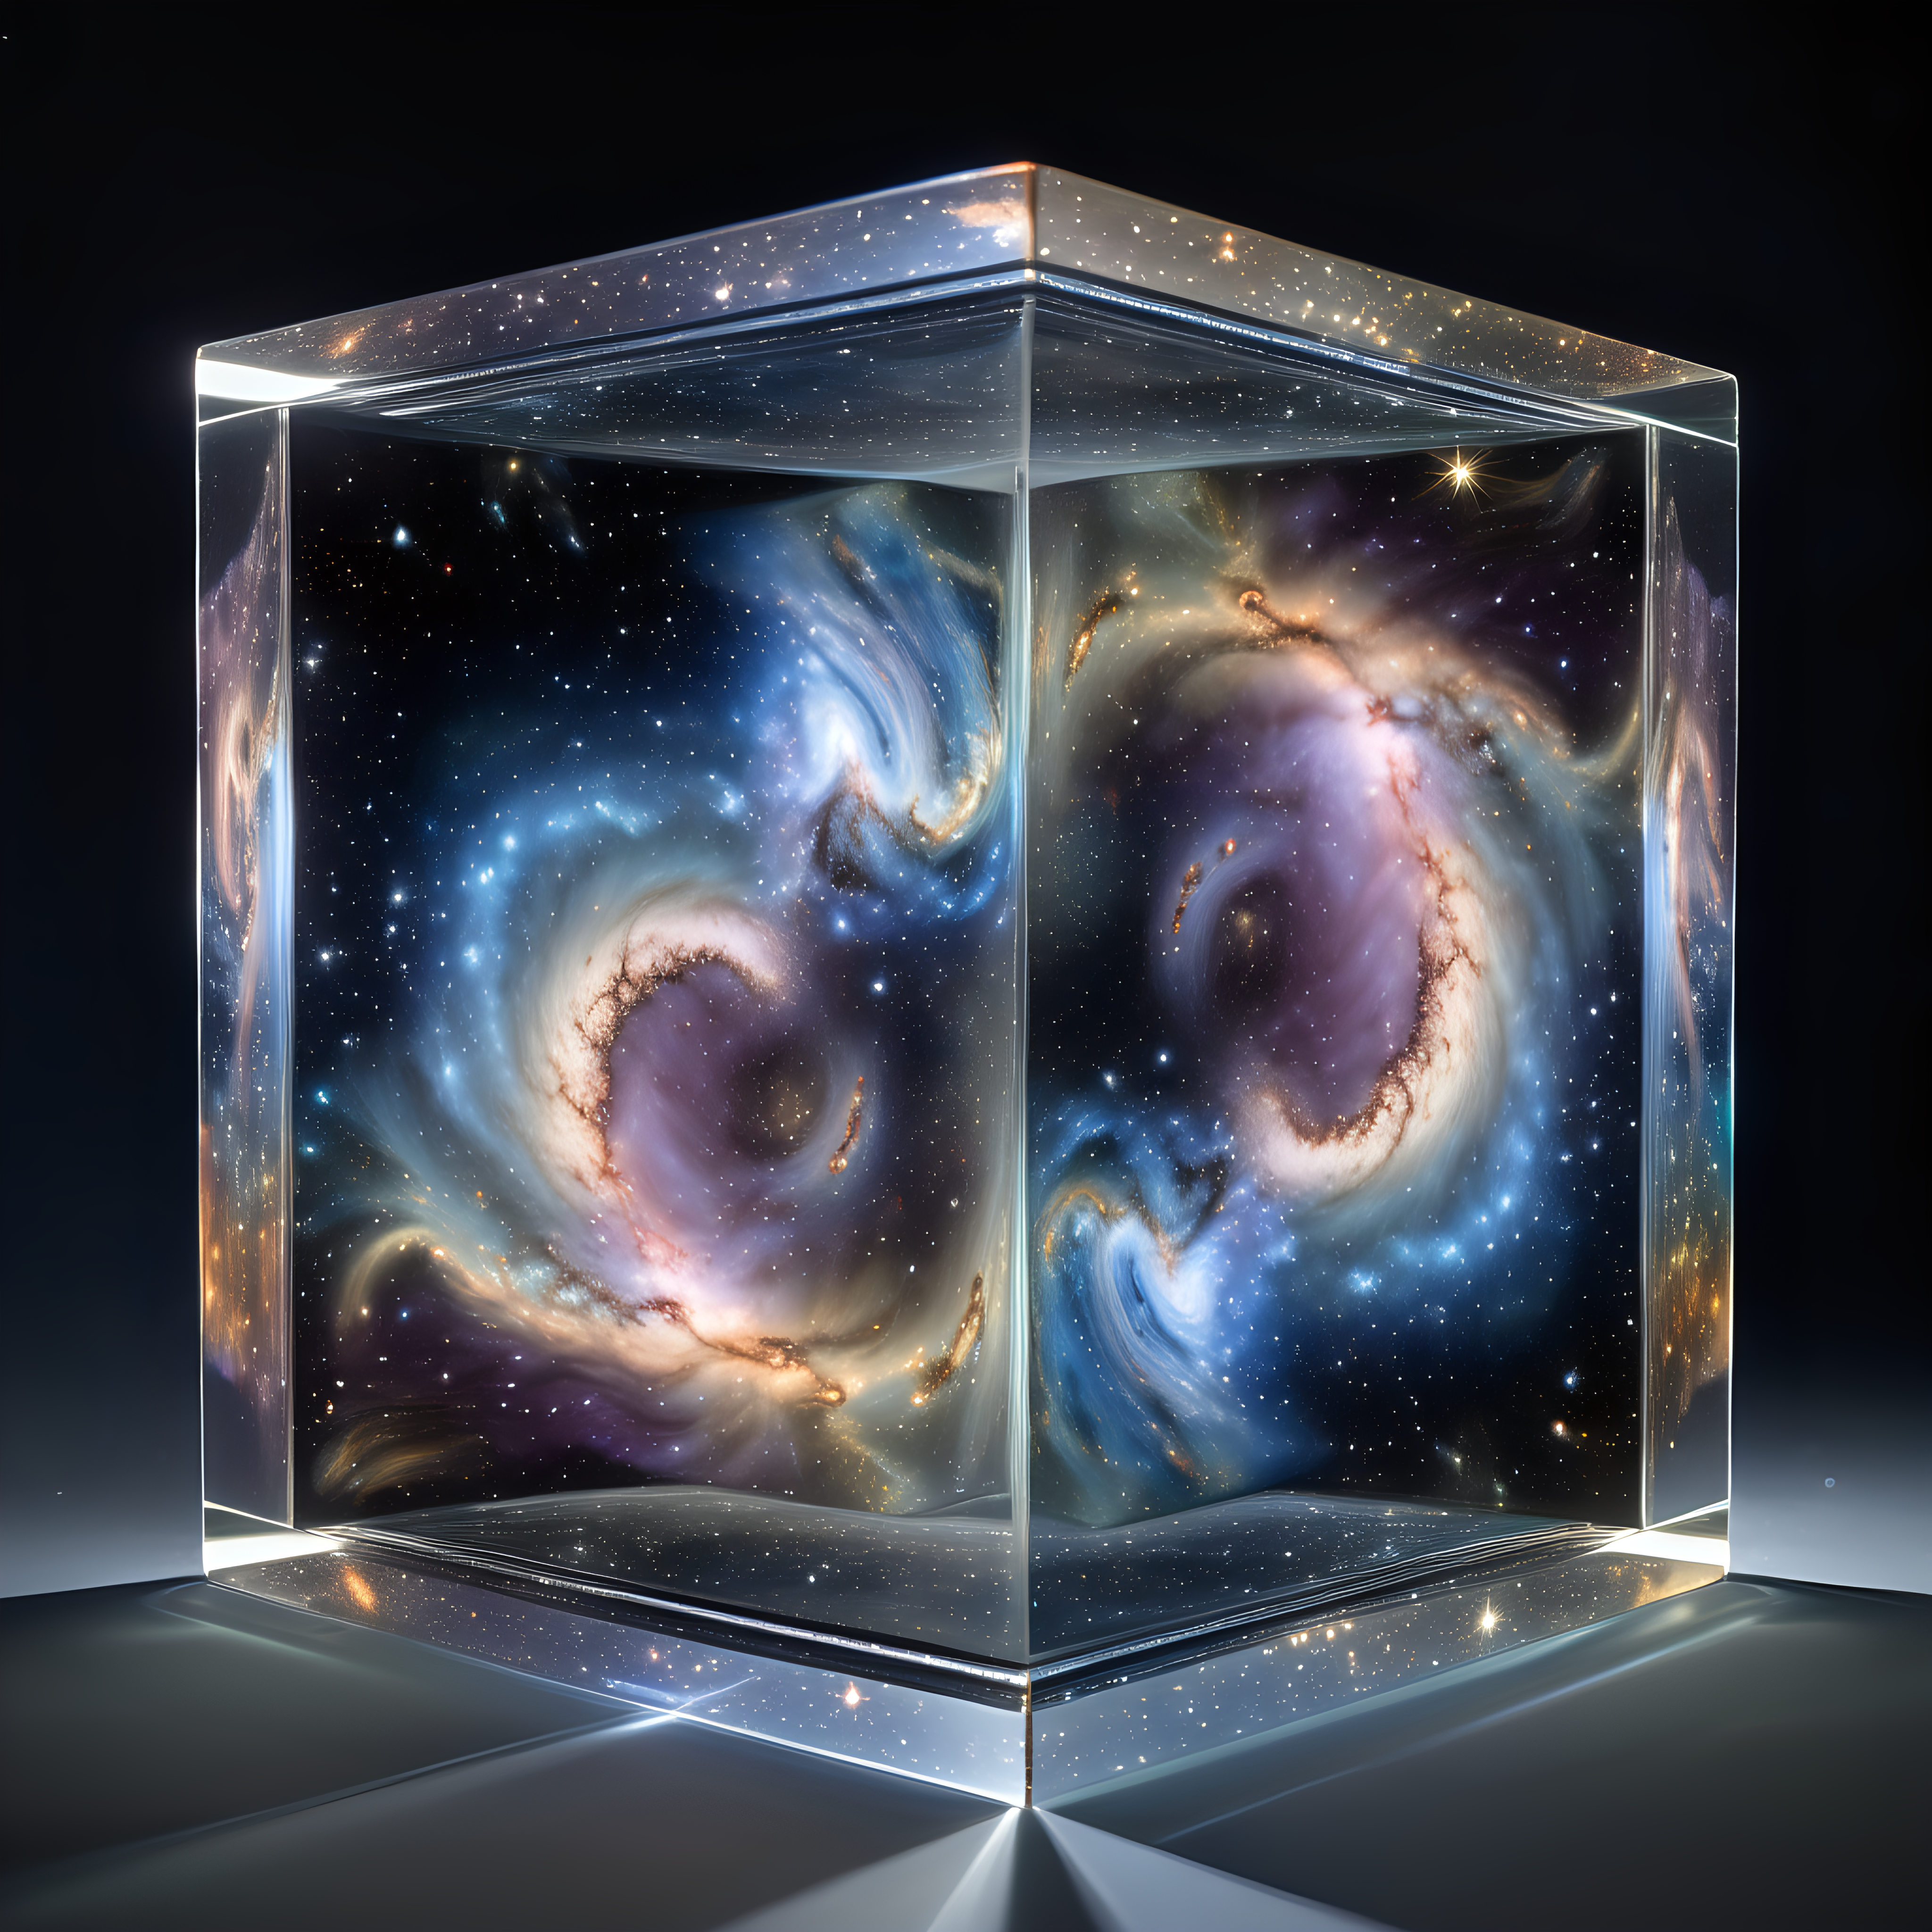 Spiraling galaxies and stardust seen through a three dimensional glass cube